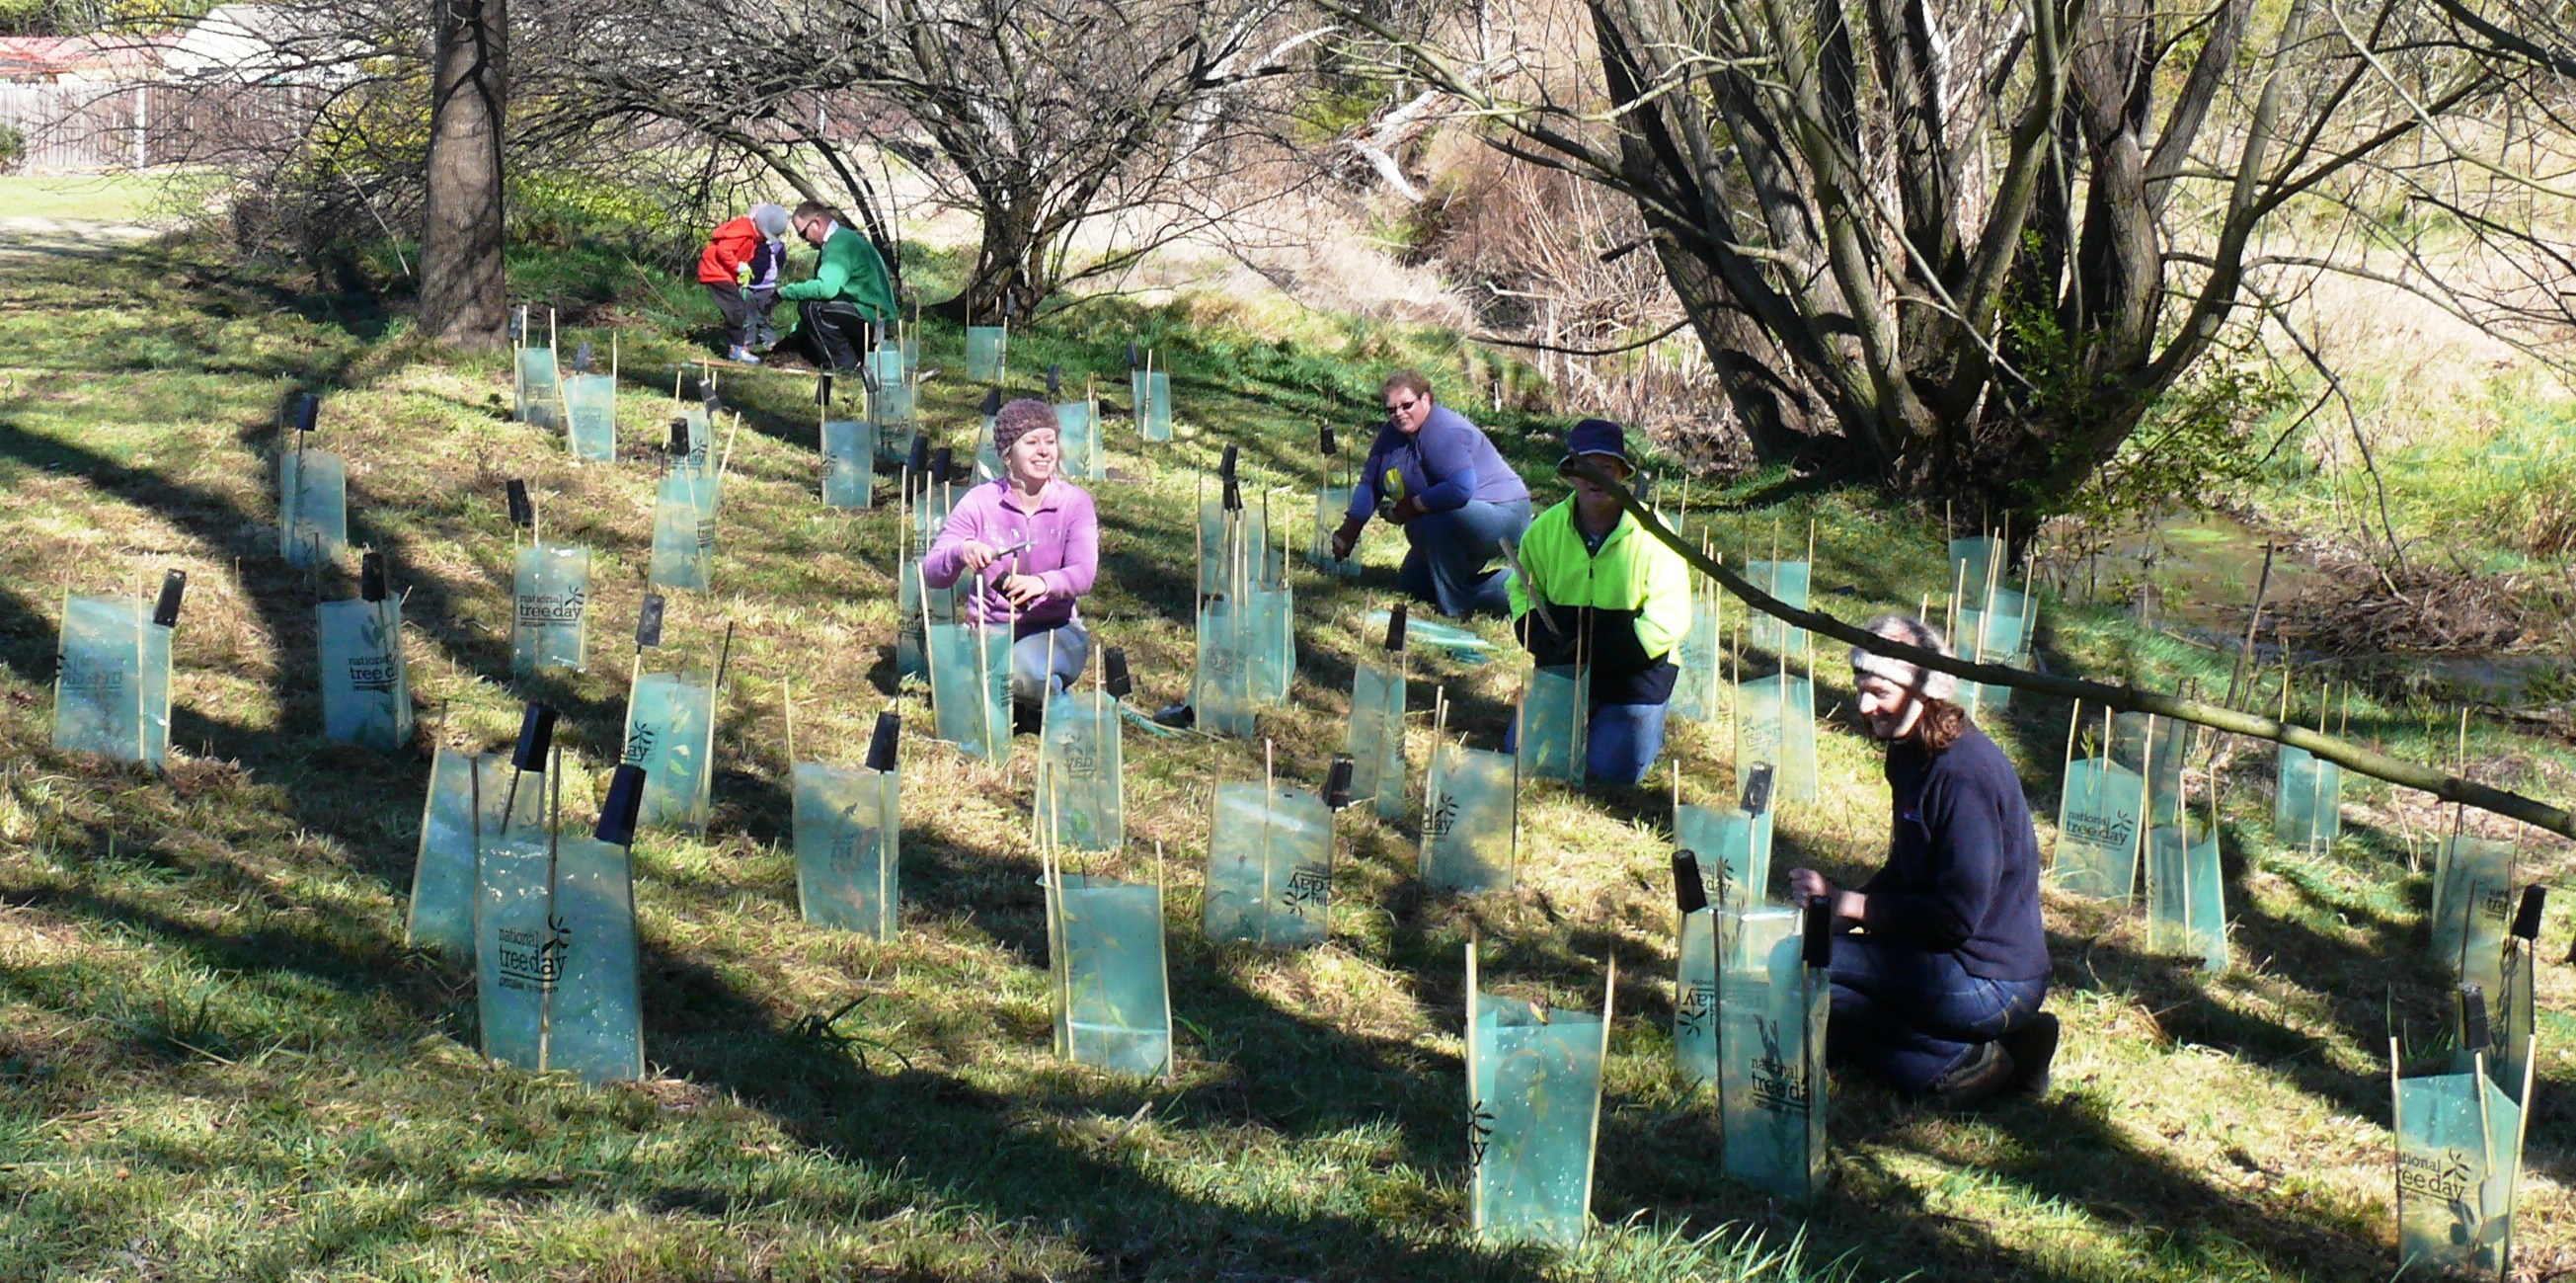 Planting along Statemine Gully for National Tree Day